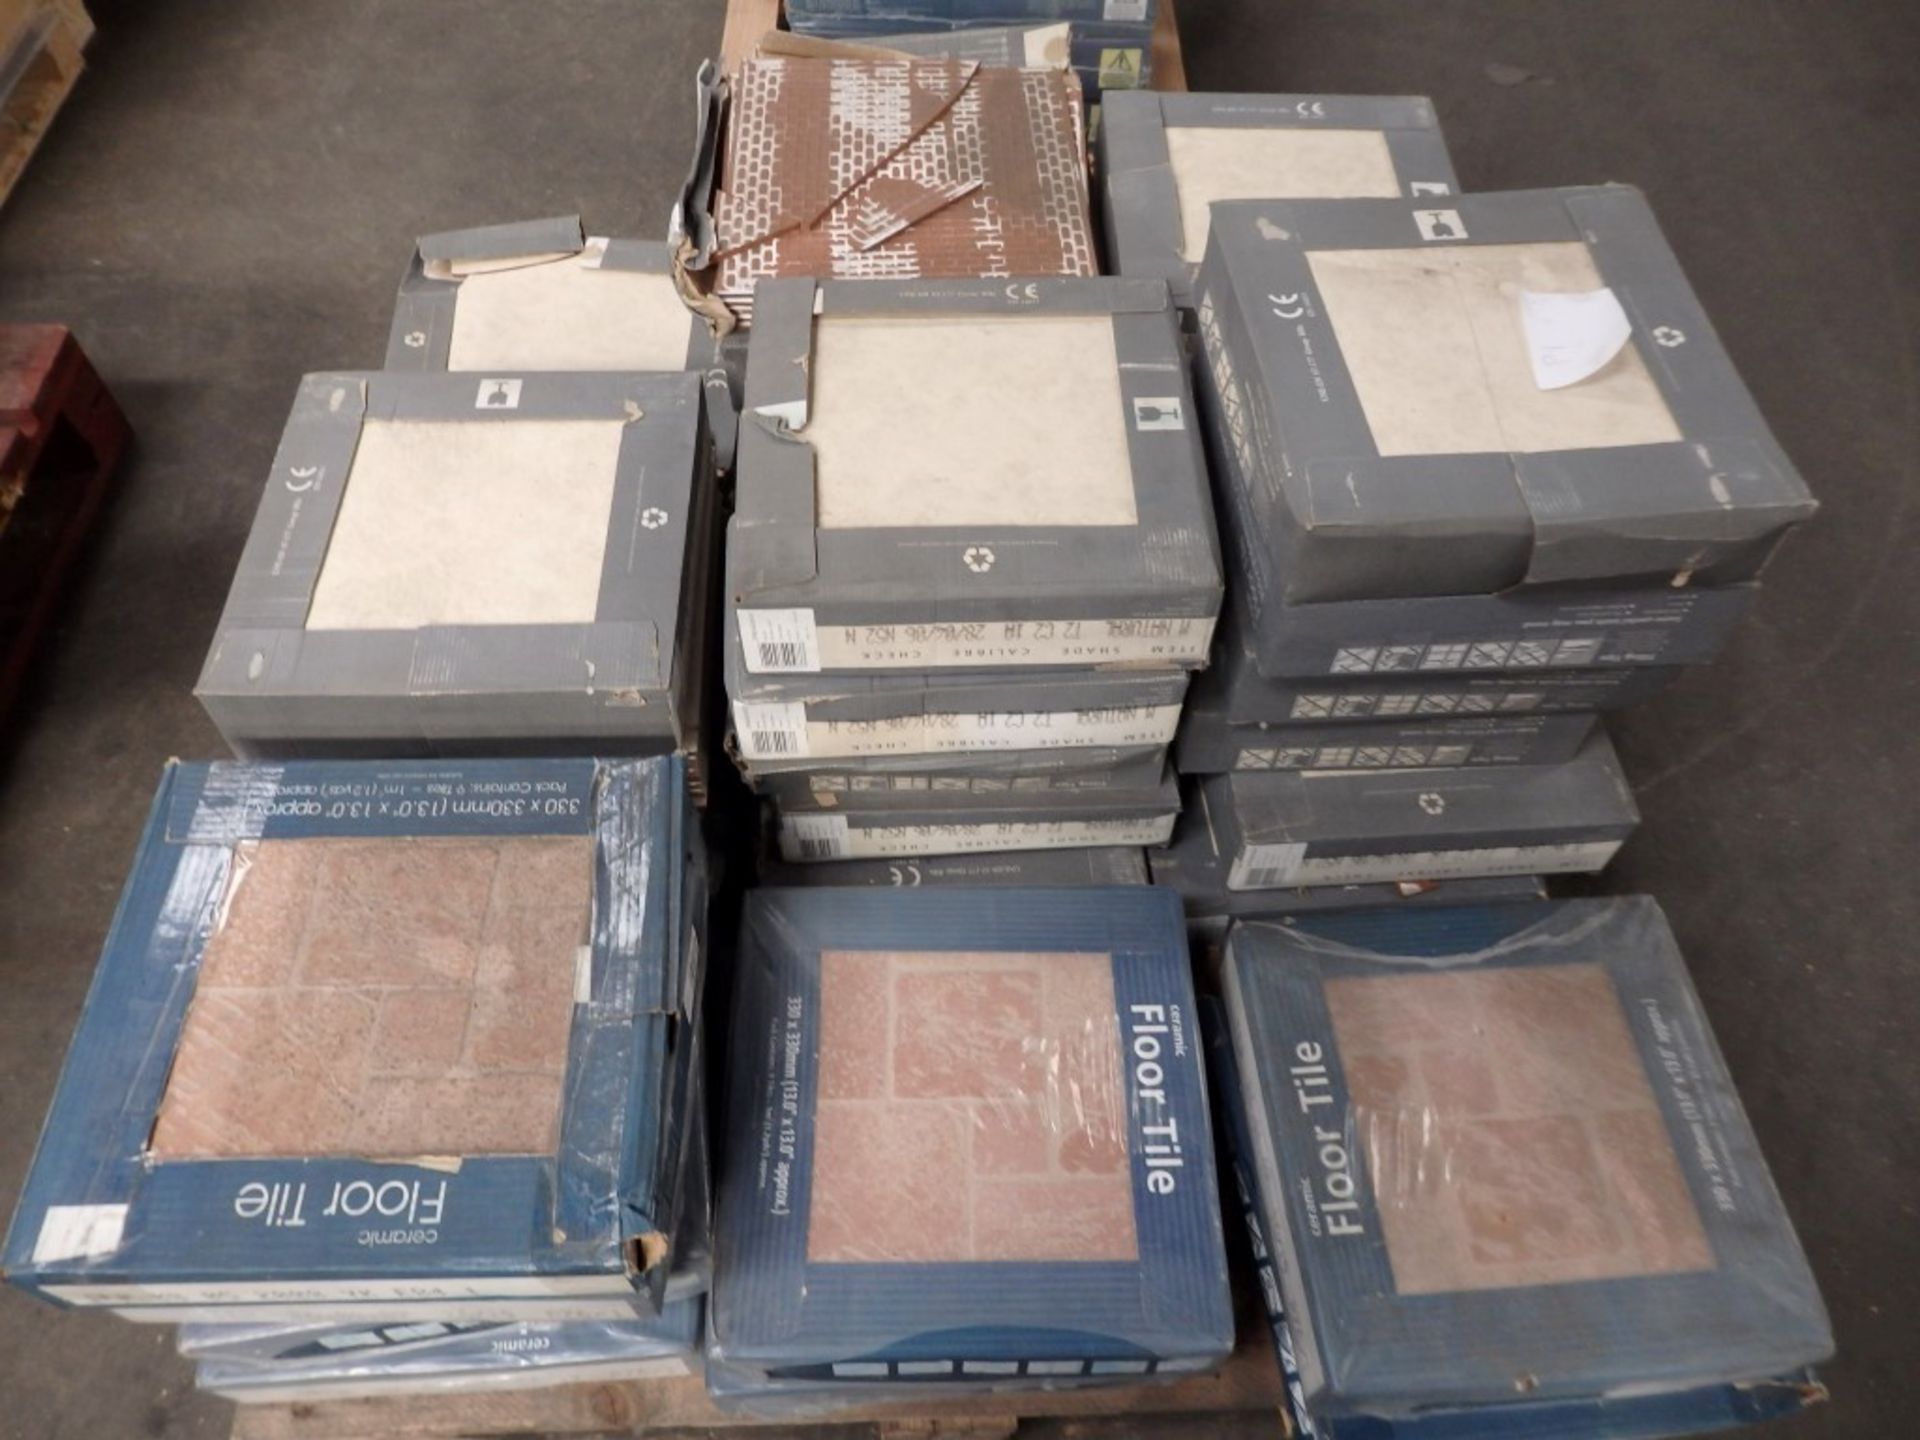 Approx 35 Boxes of Ceramic Floor Tiles - 330x330mm Floor Tiles - Each Pack Contains 9 Tiles - Ref - Image 3 of 4